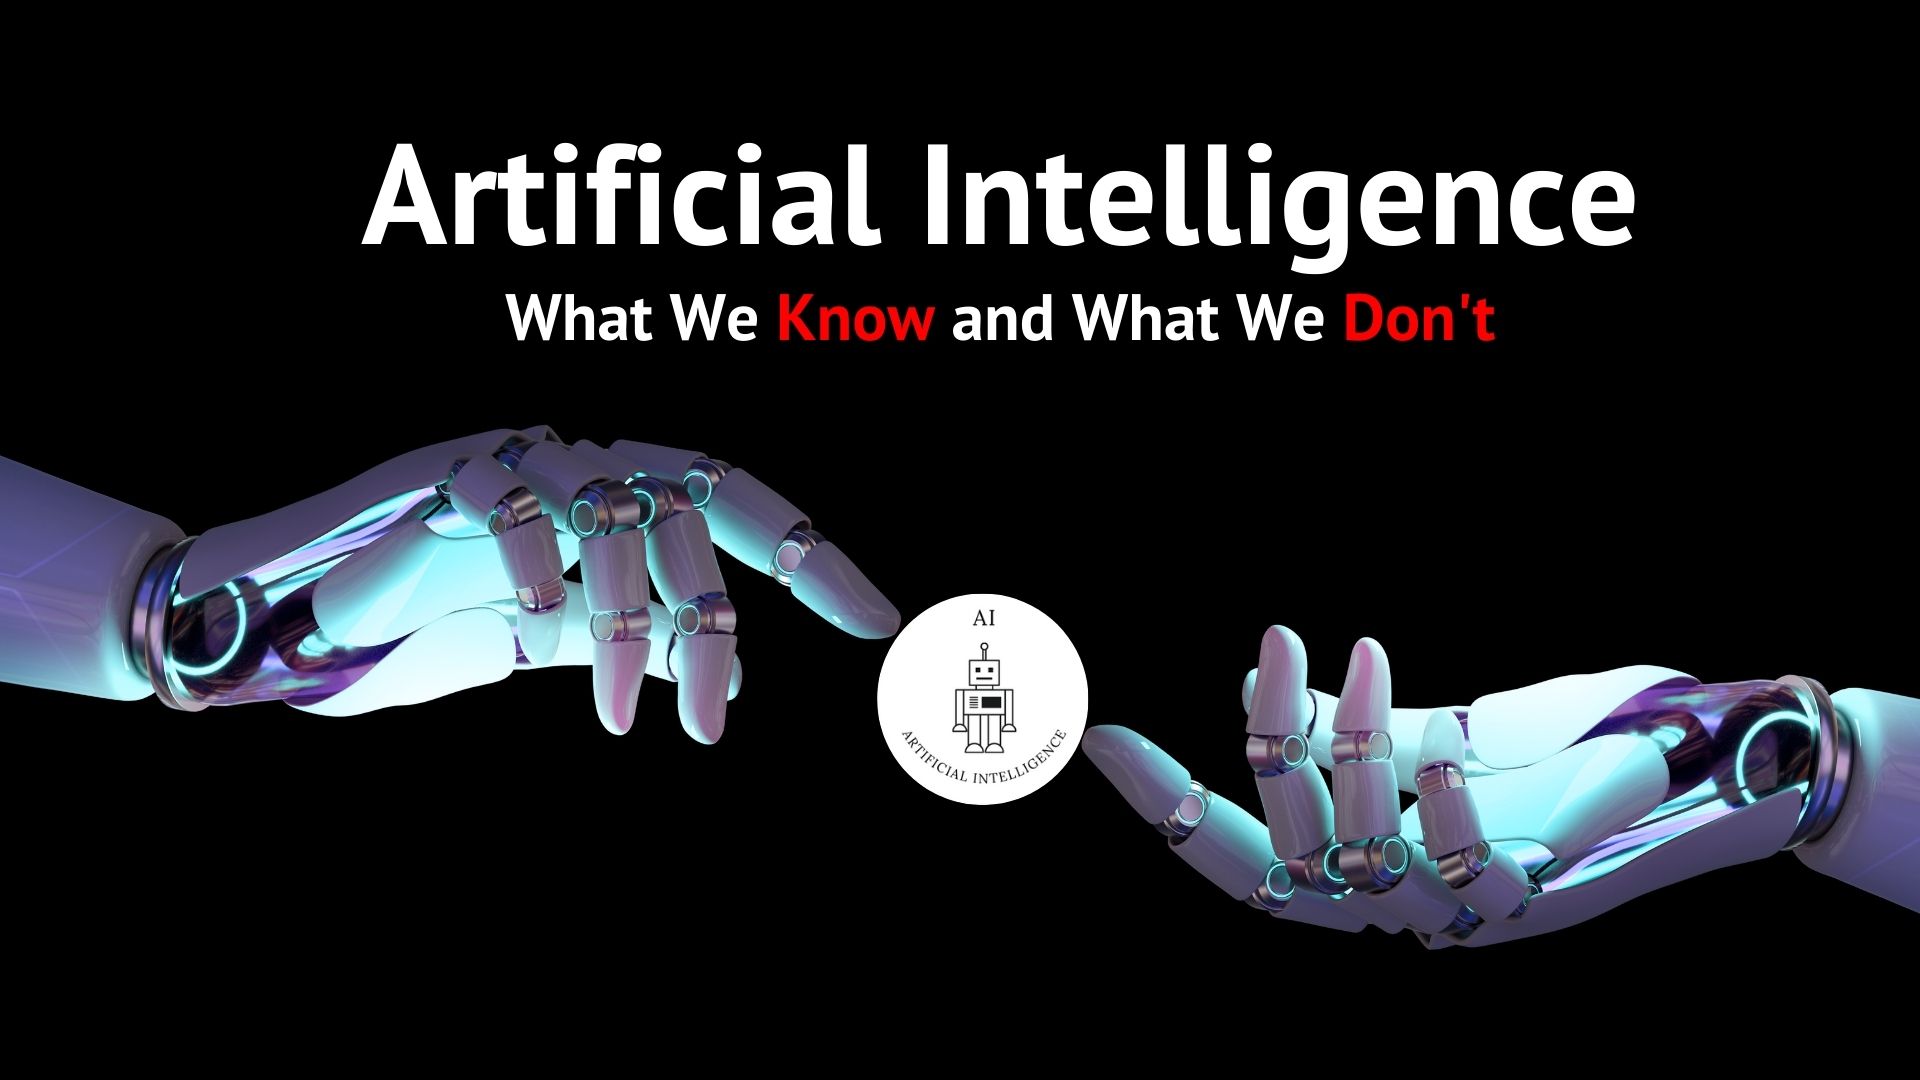 Artificial Intelligence: What We Know and What We Don't